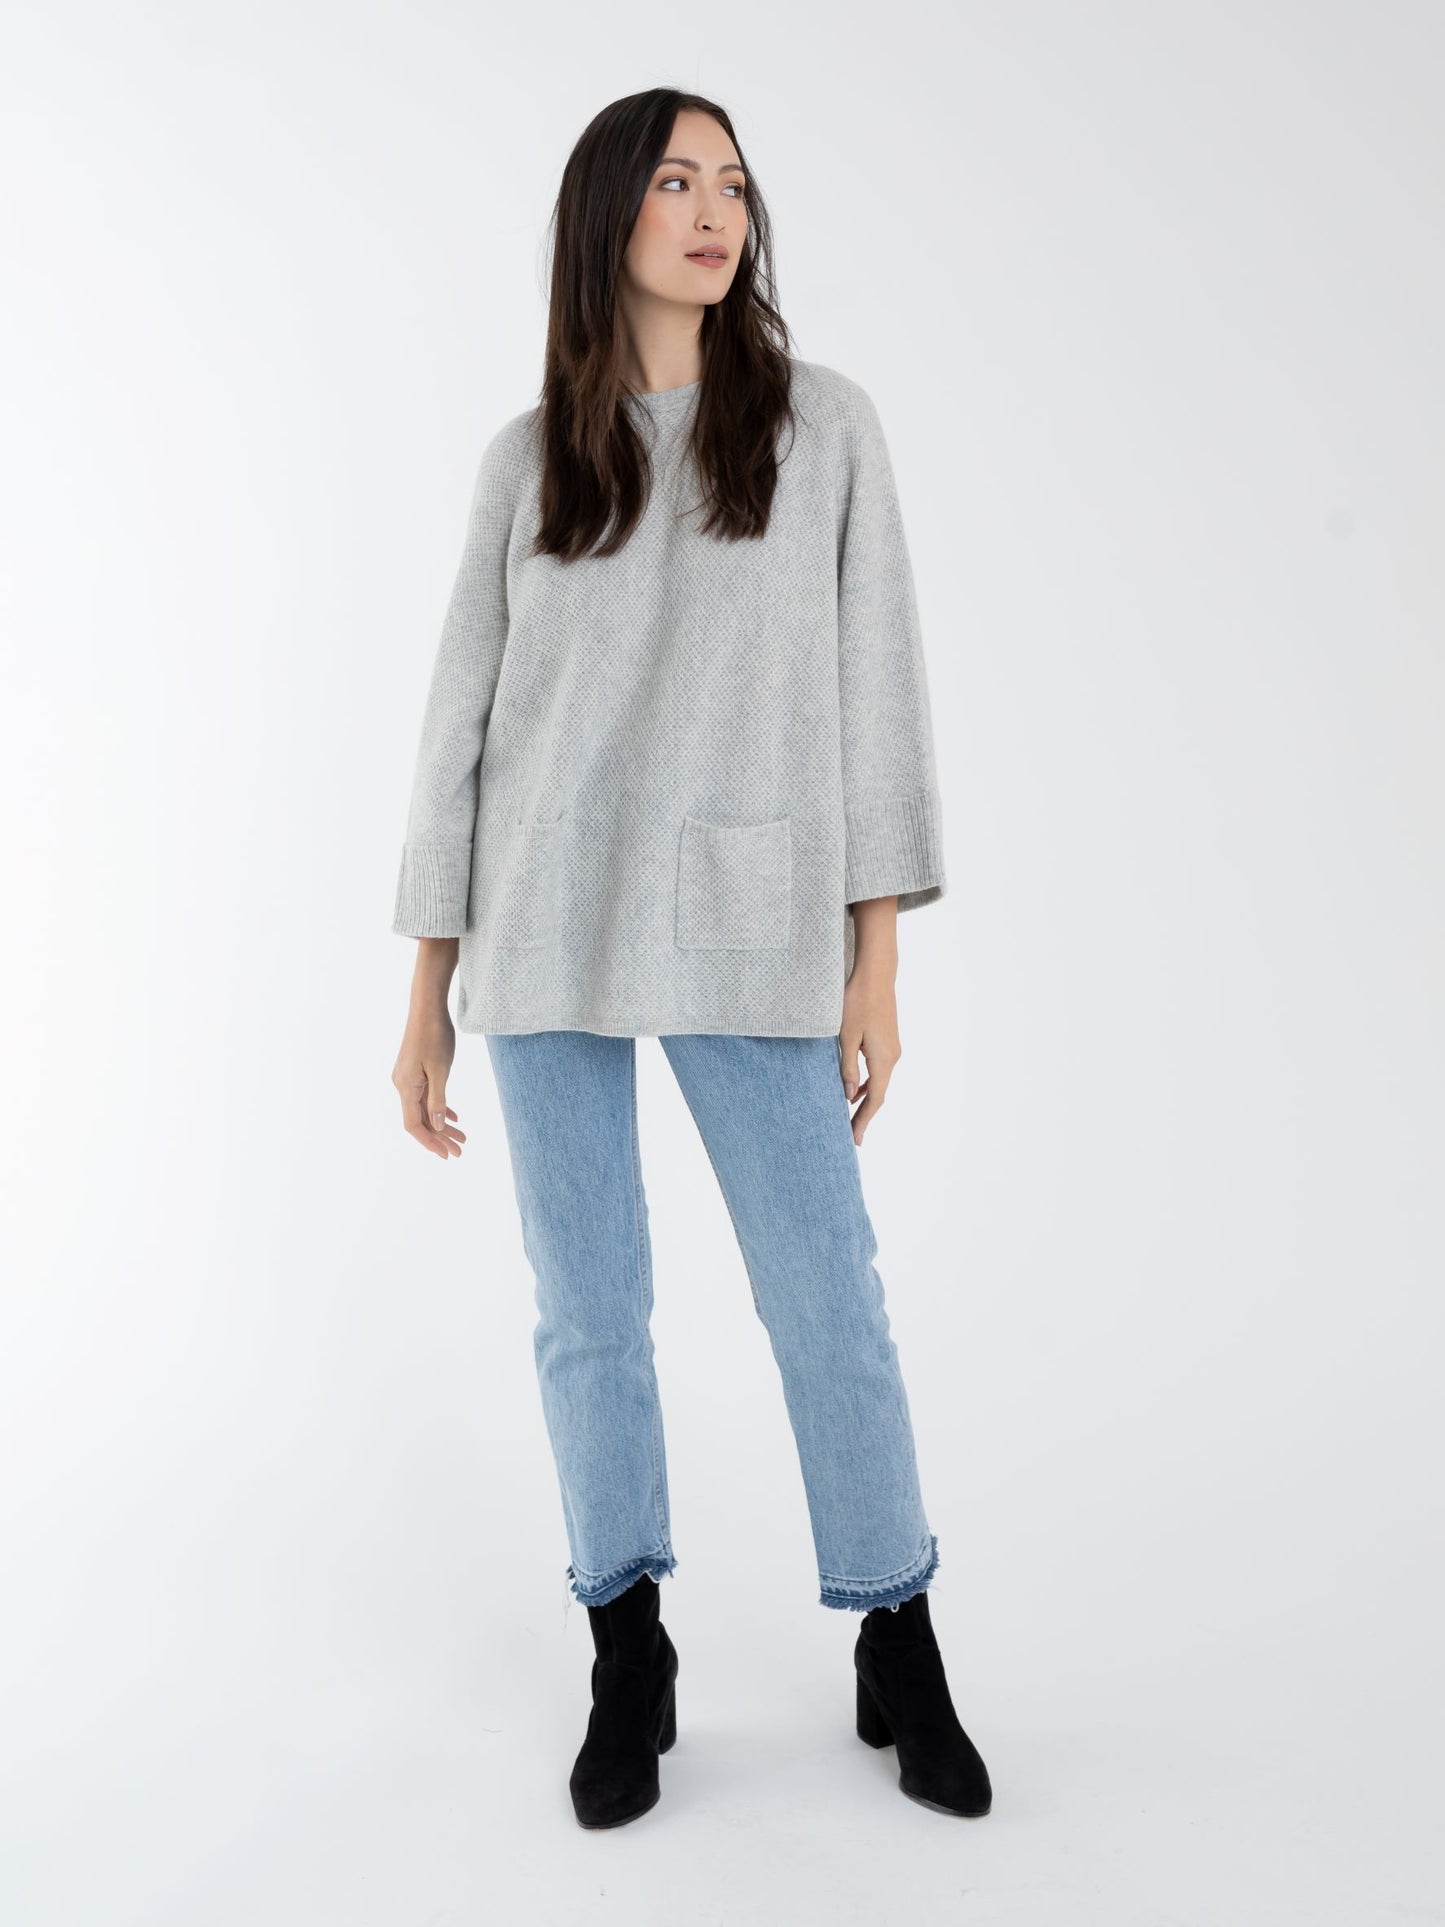 Napa Valley Poncho by Alashan Cashmere in Ash